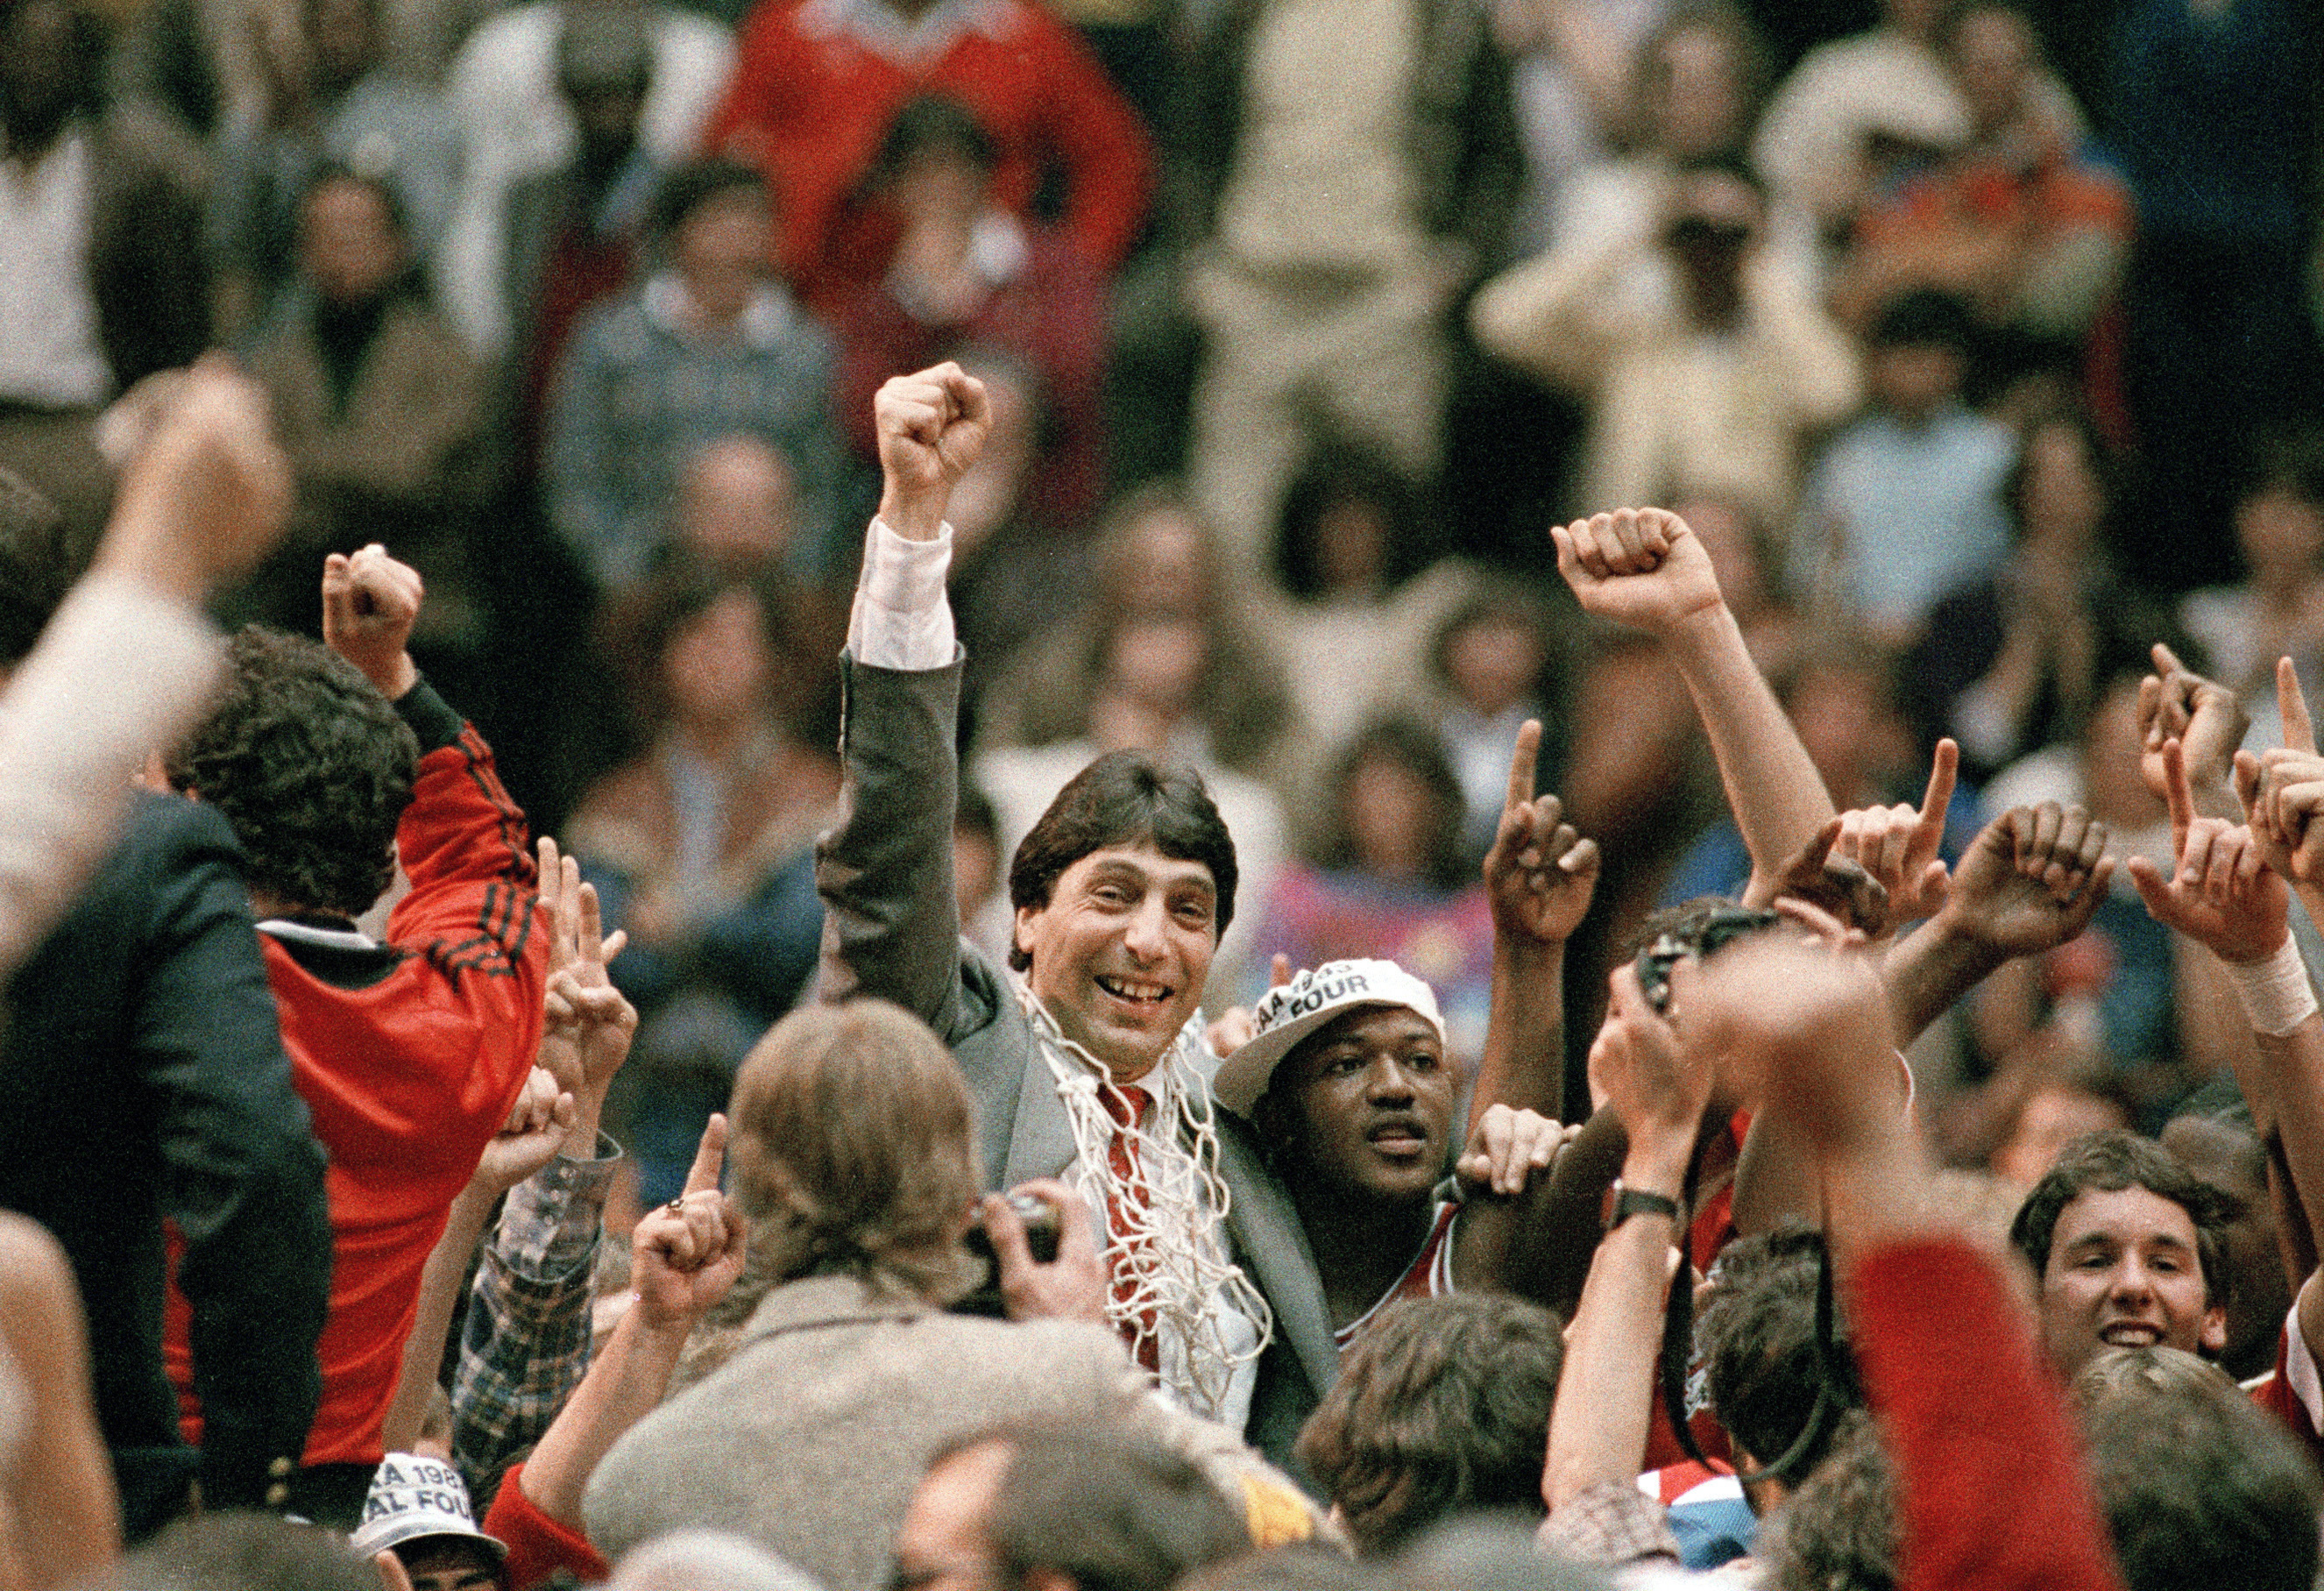 NC State's Valvano among group selected into Hall of Fame, joins Popovich,  Nowitzki and others